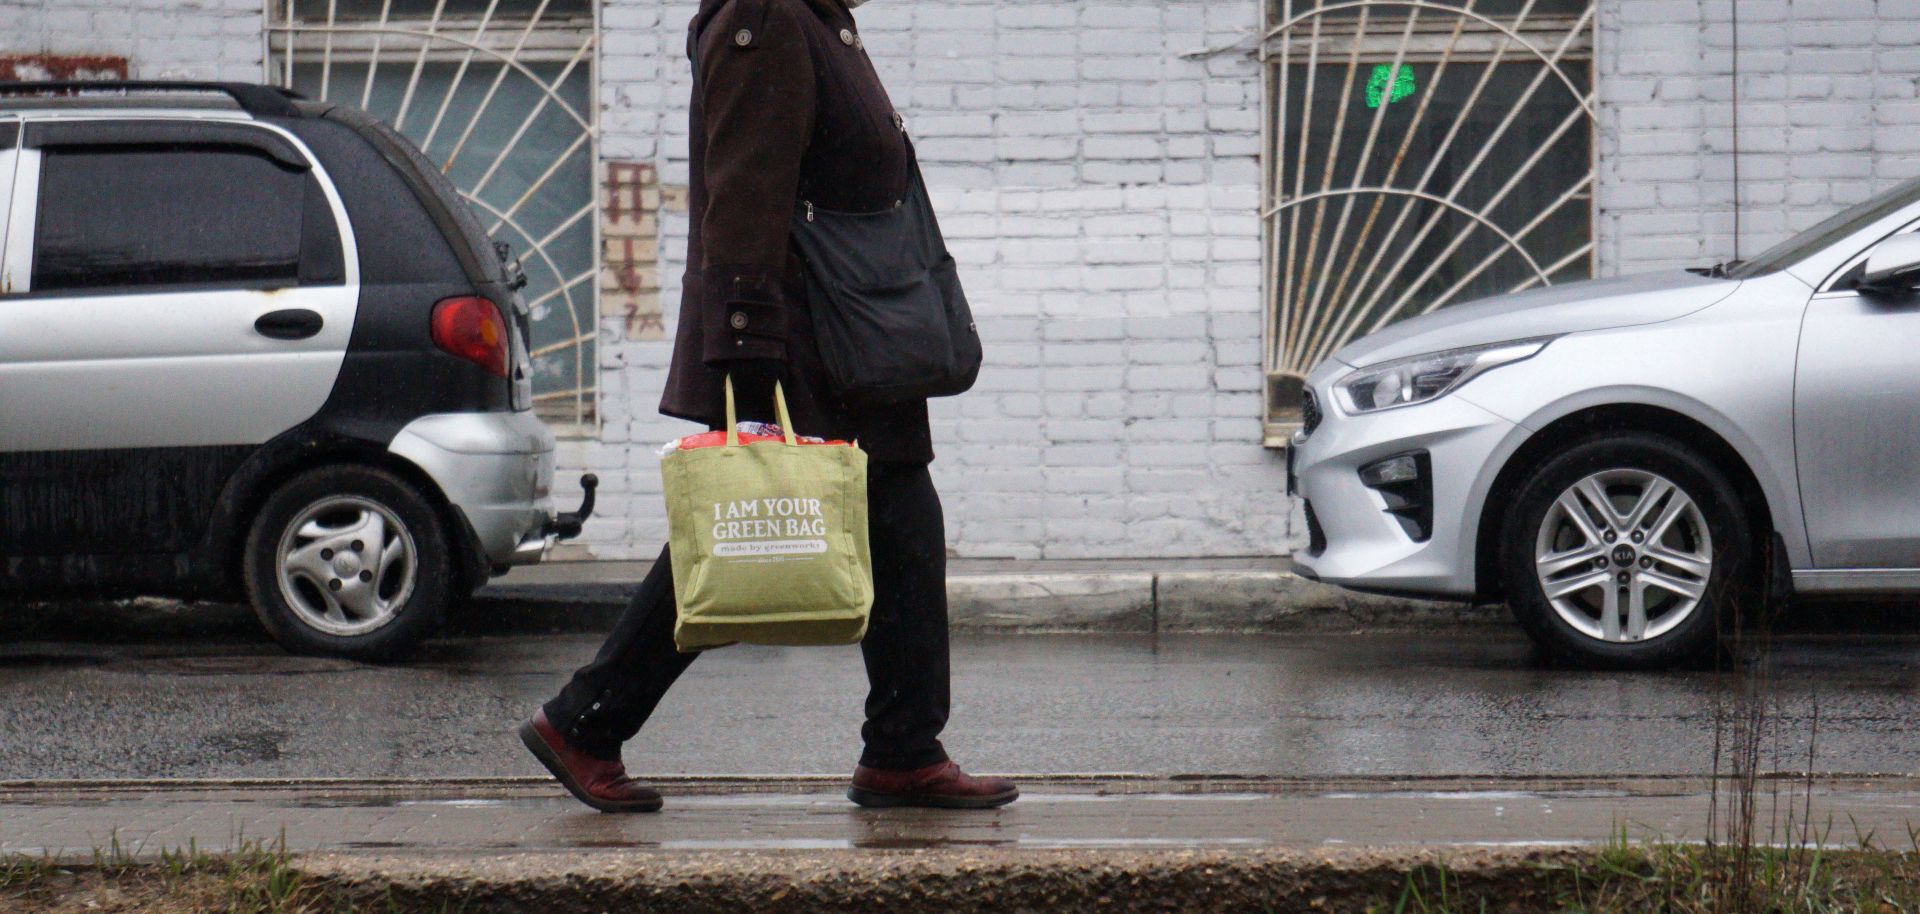 A woman wearing a protective mask carries a grocery bag in Dedovsk, Russia, on April 16, 2020. To contain the COVID-19 outbreak, Russian President Vladimir Putin recently extended the government’s national stay-at-home order until May.